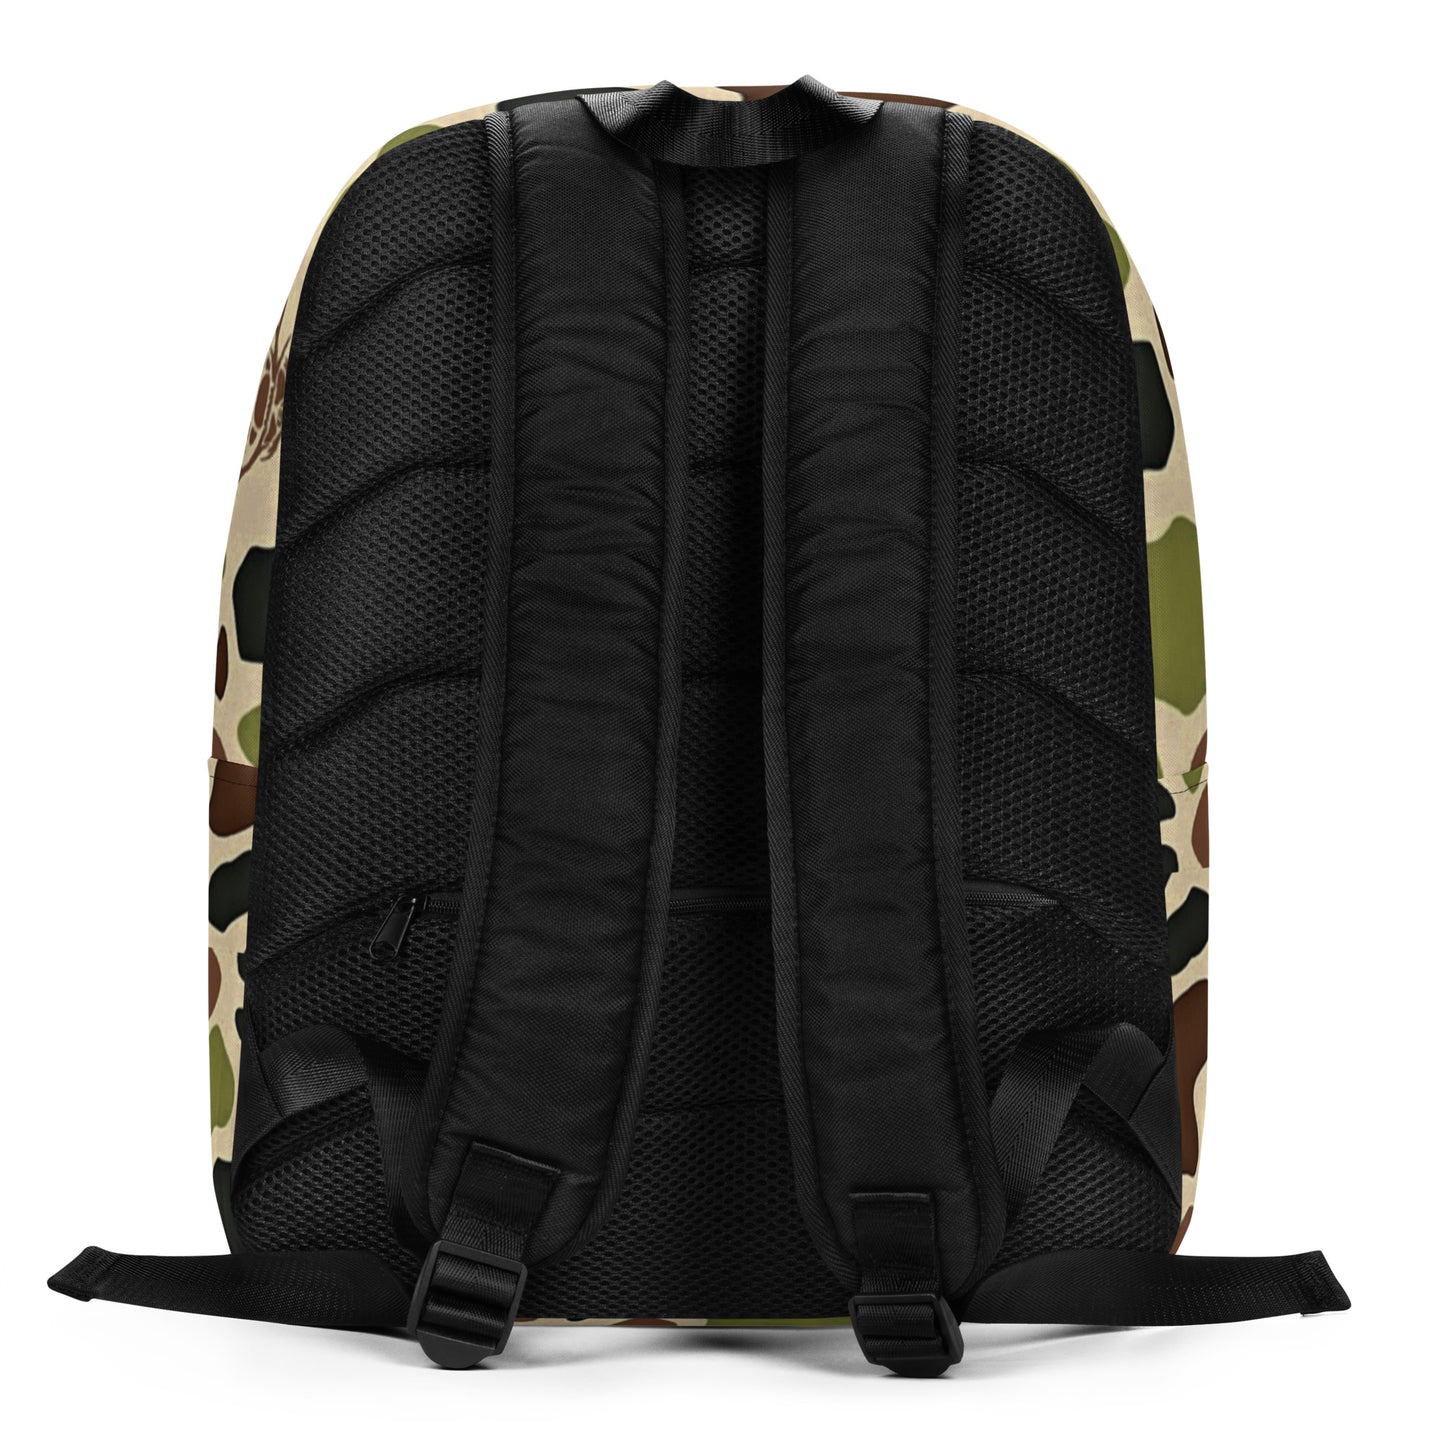 DGD Camo hunting backpack